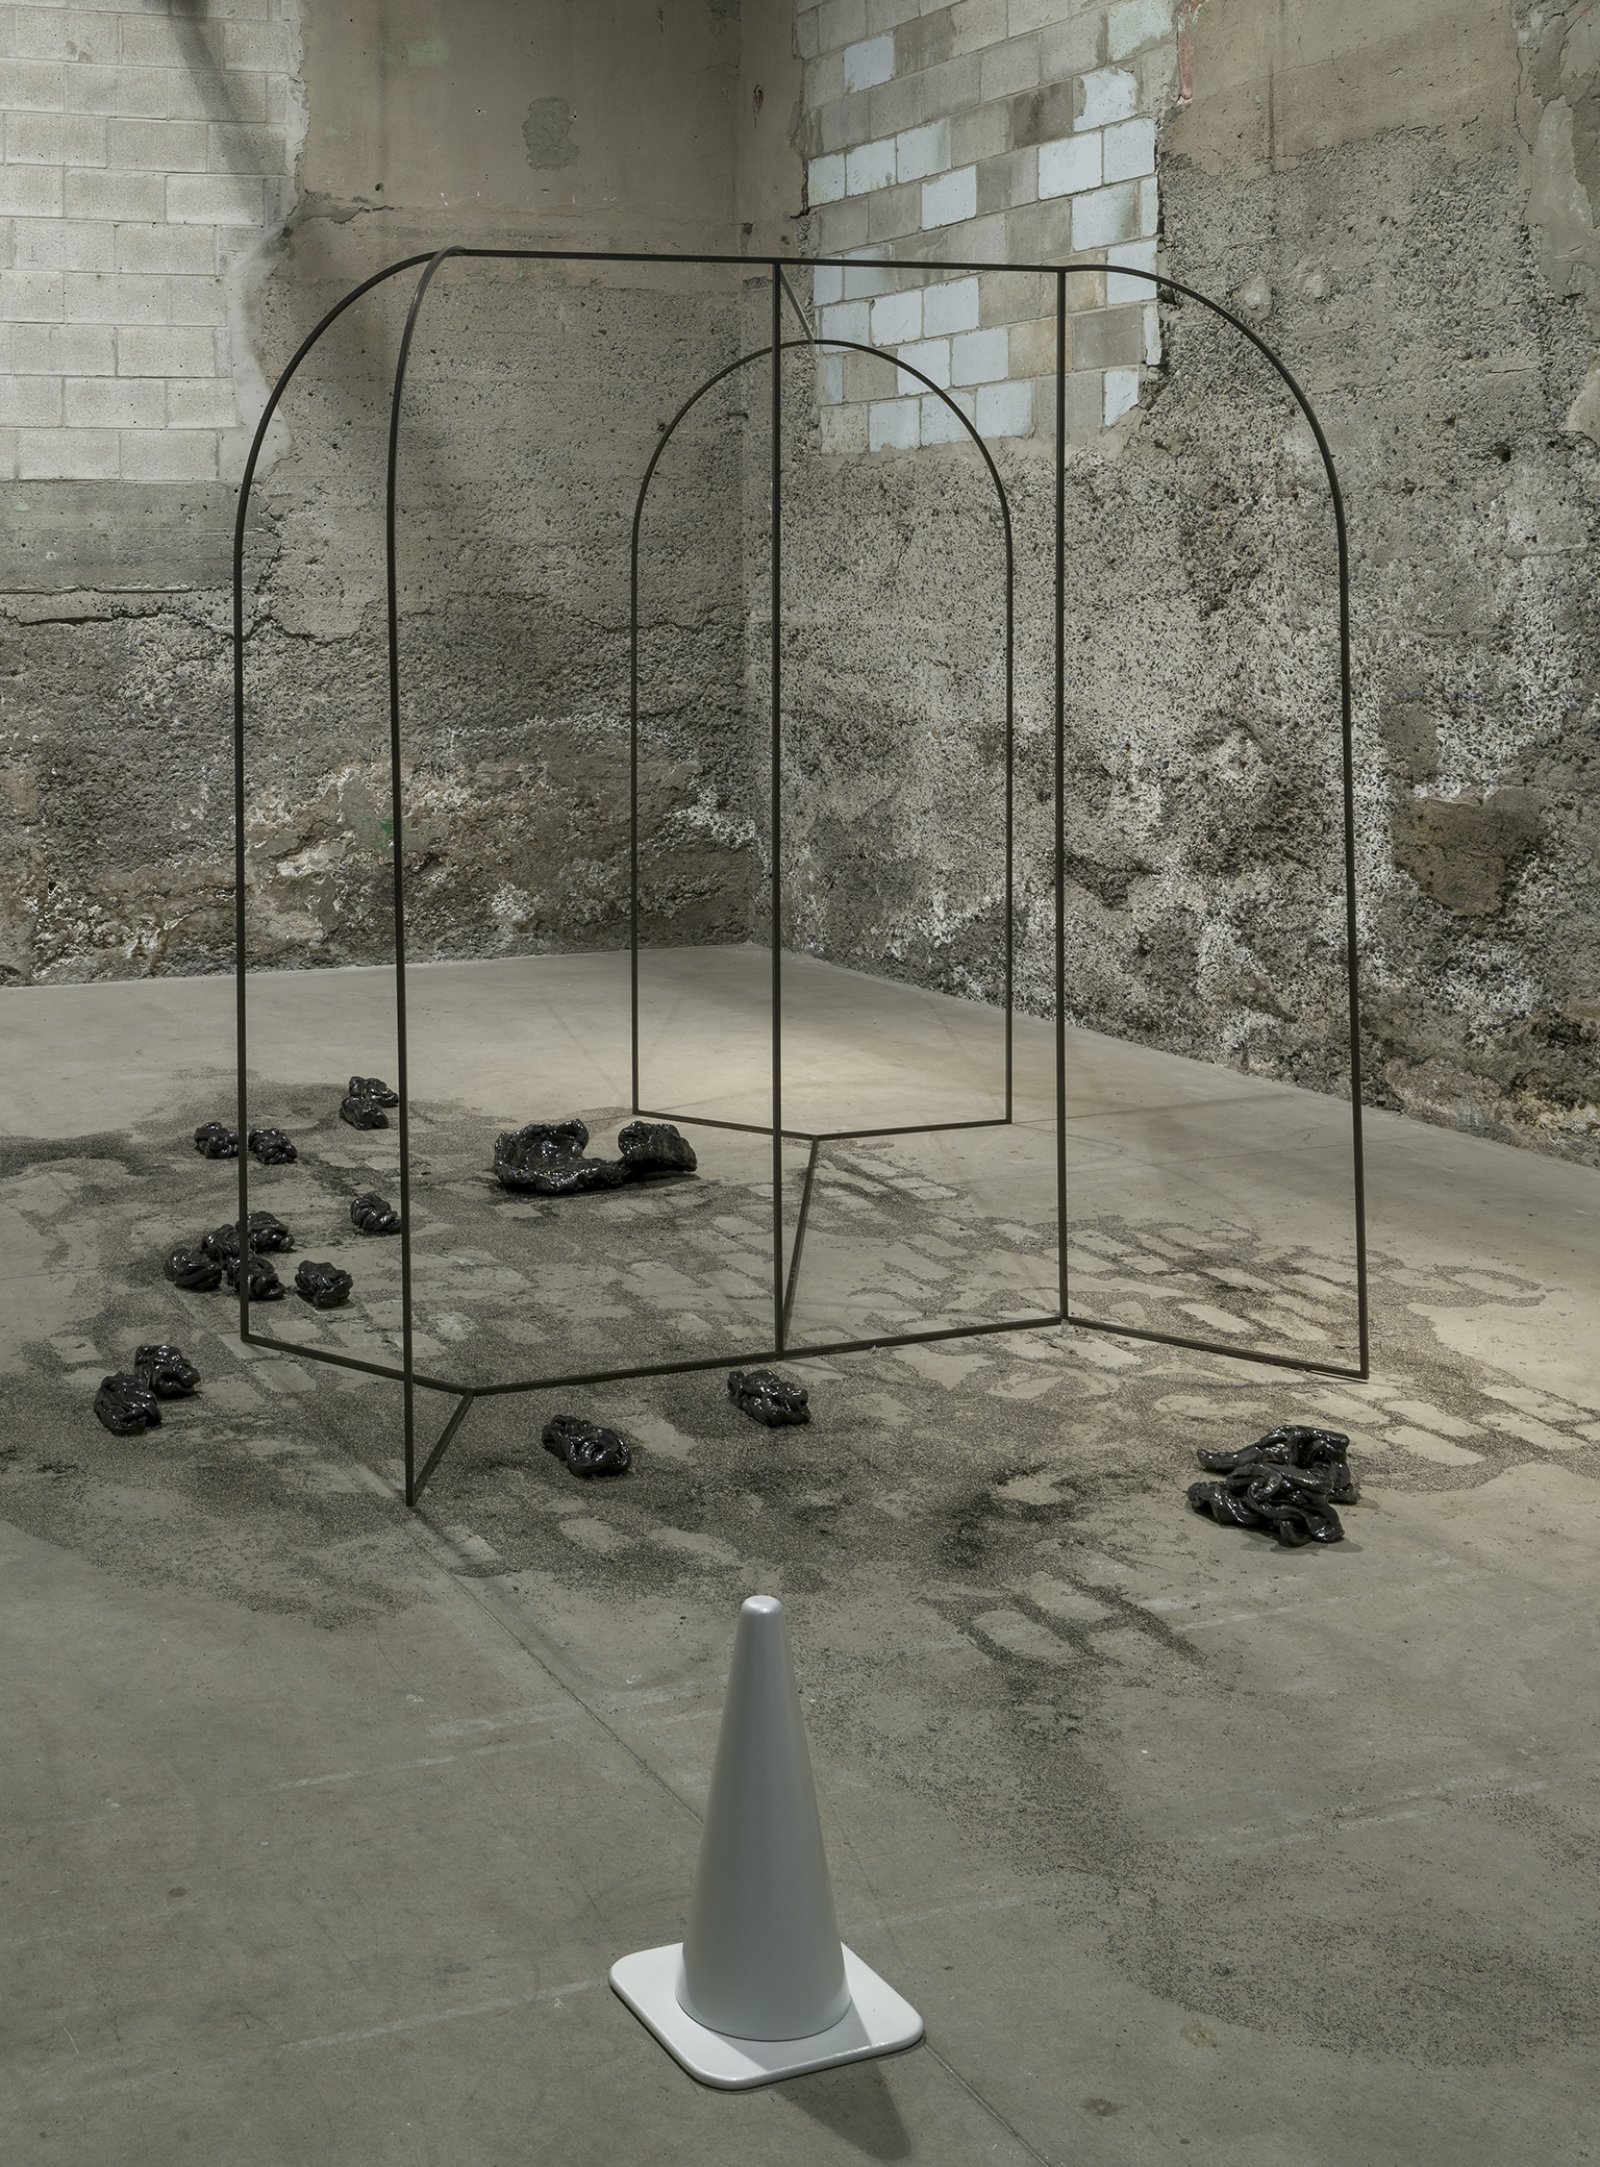 Rochelle Goldberg, The Mirror Isn’t Finished, 2016, steel, ceramic, chia, coal slag, 84 x 84 x 84 in. (213 x 213 x 213 cm). Installation view, A Worm Filled Body, Parisian Laundry, Montreal, Canada, 2016